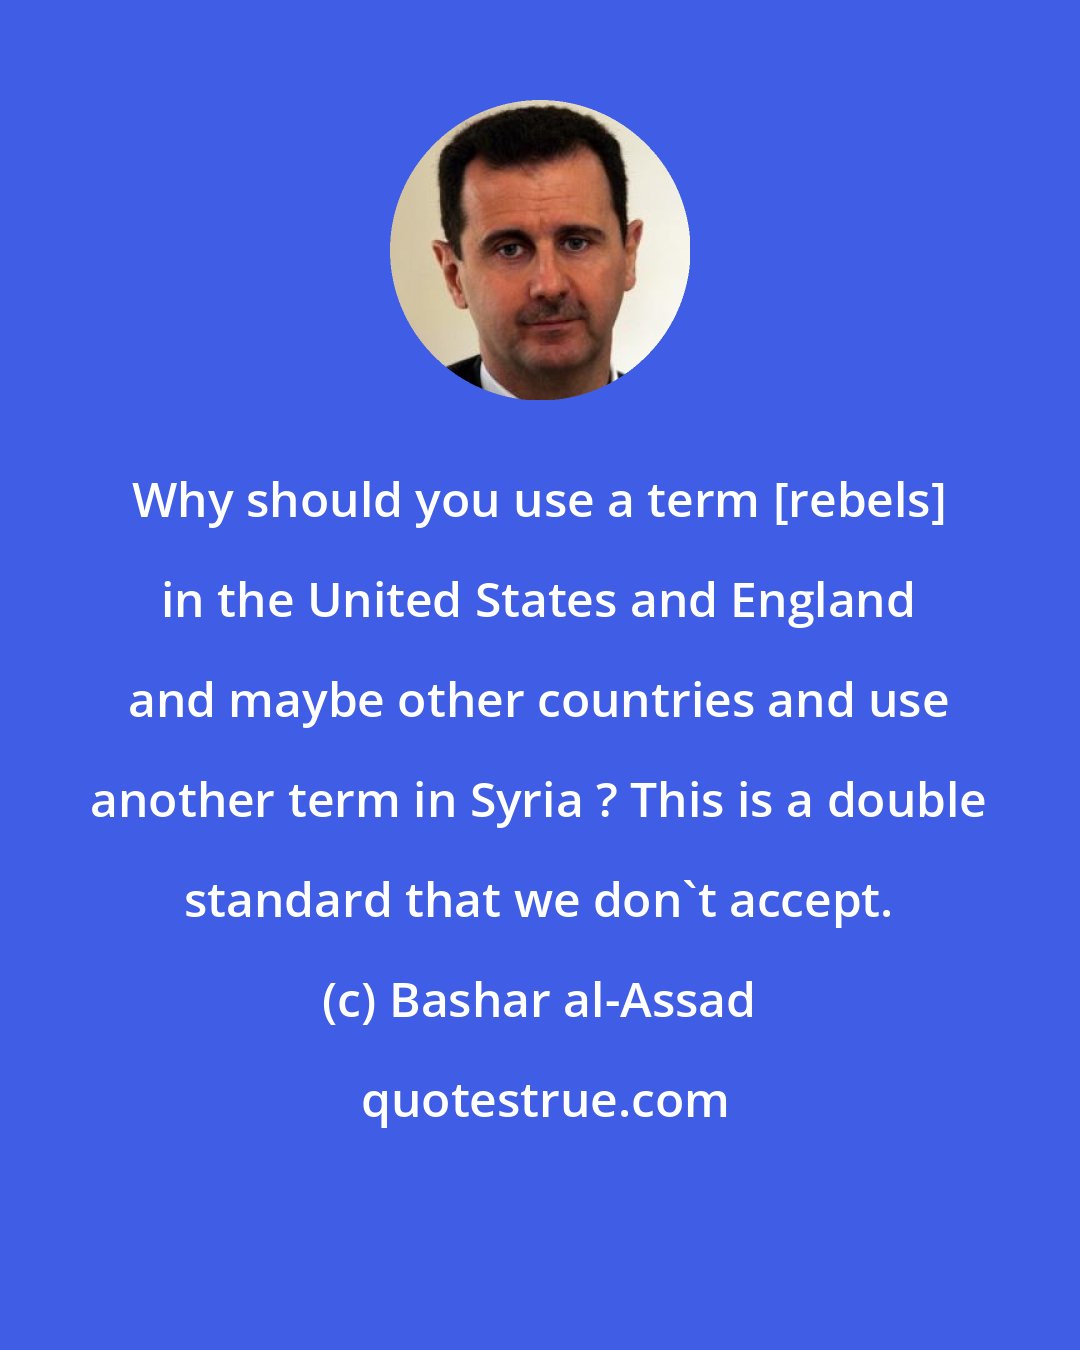 Bashar al-Assad: Why should you use a term [rebels] in the United States and England and maybe other countries and use another term in Syria ? This is a double standard that we don't accept.